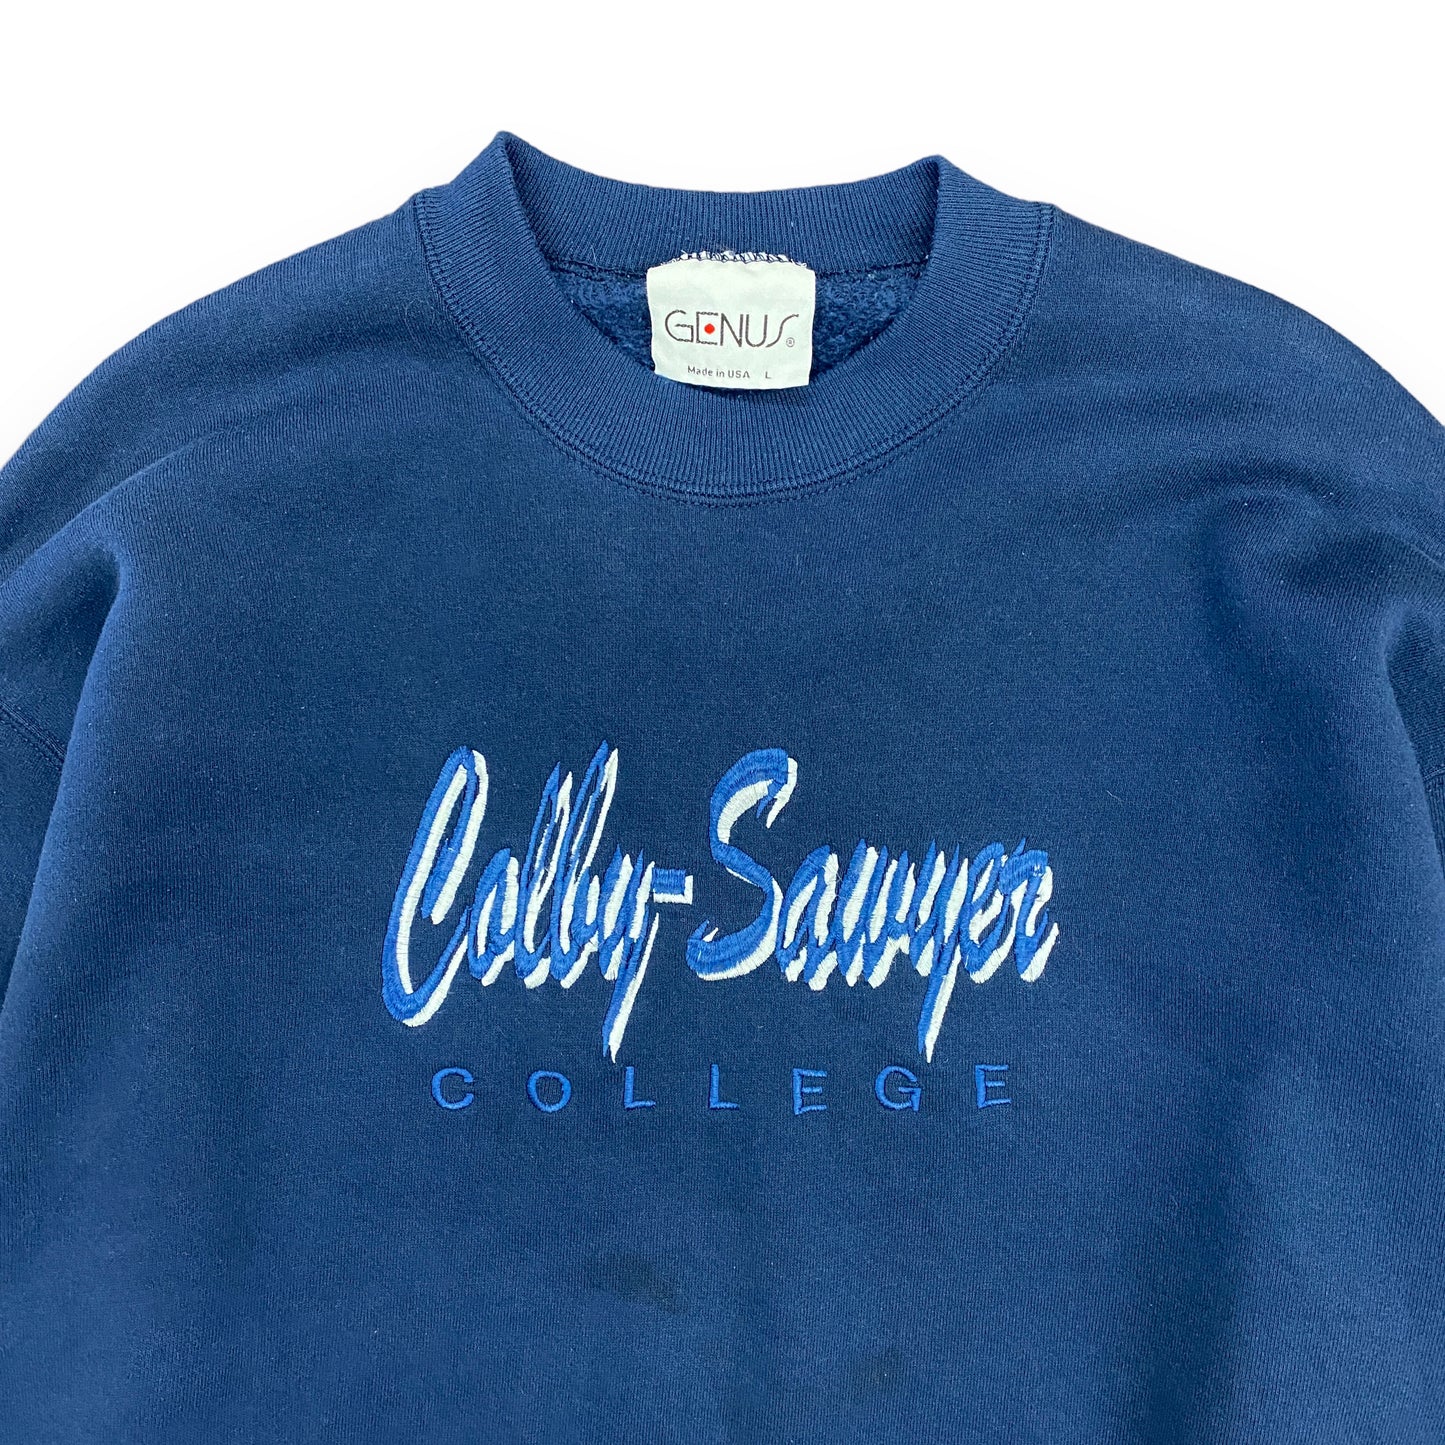 Vintage 90s Colby-Sawyer College Embroidered Sweatshirt - Size Large